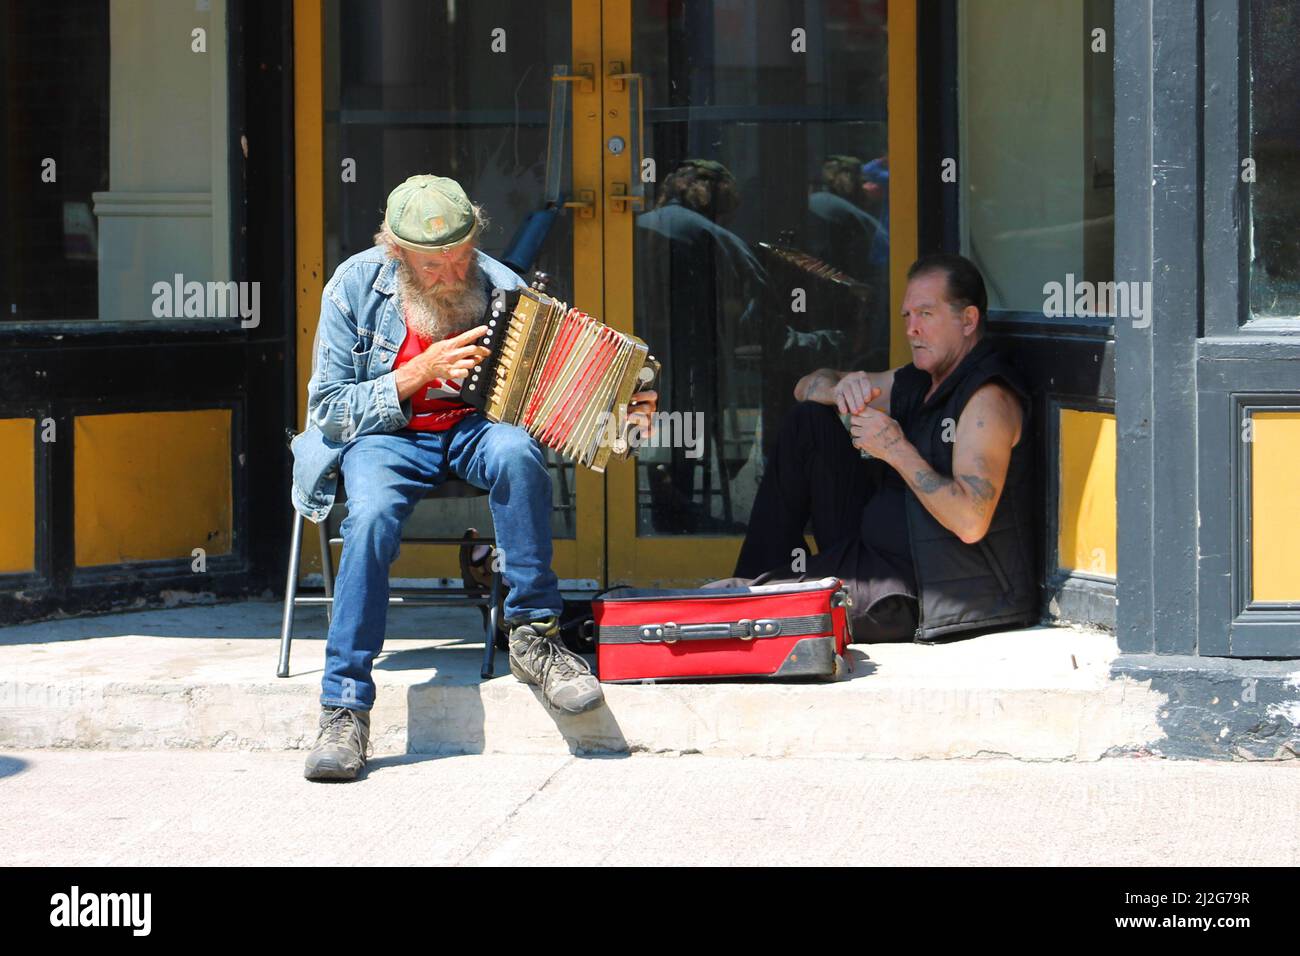 A busker playing an accordian in a doorway, a street person is also sitting in the doorway, Water Street, St. John's, NL Stock Photo